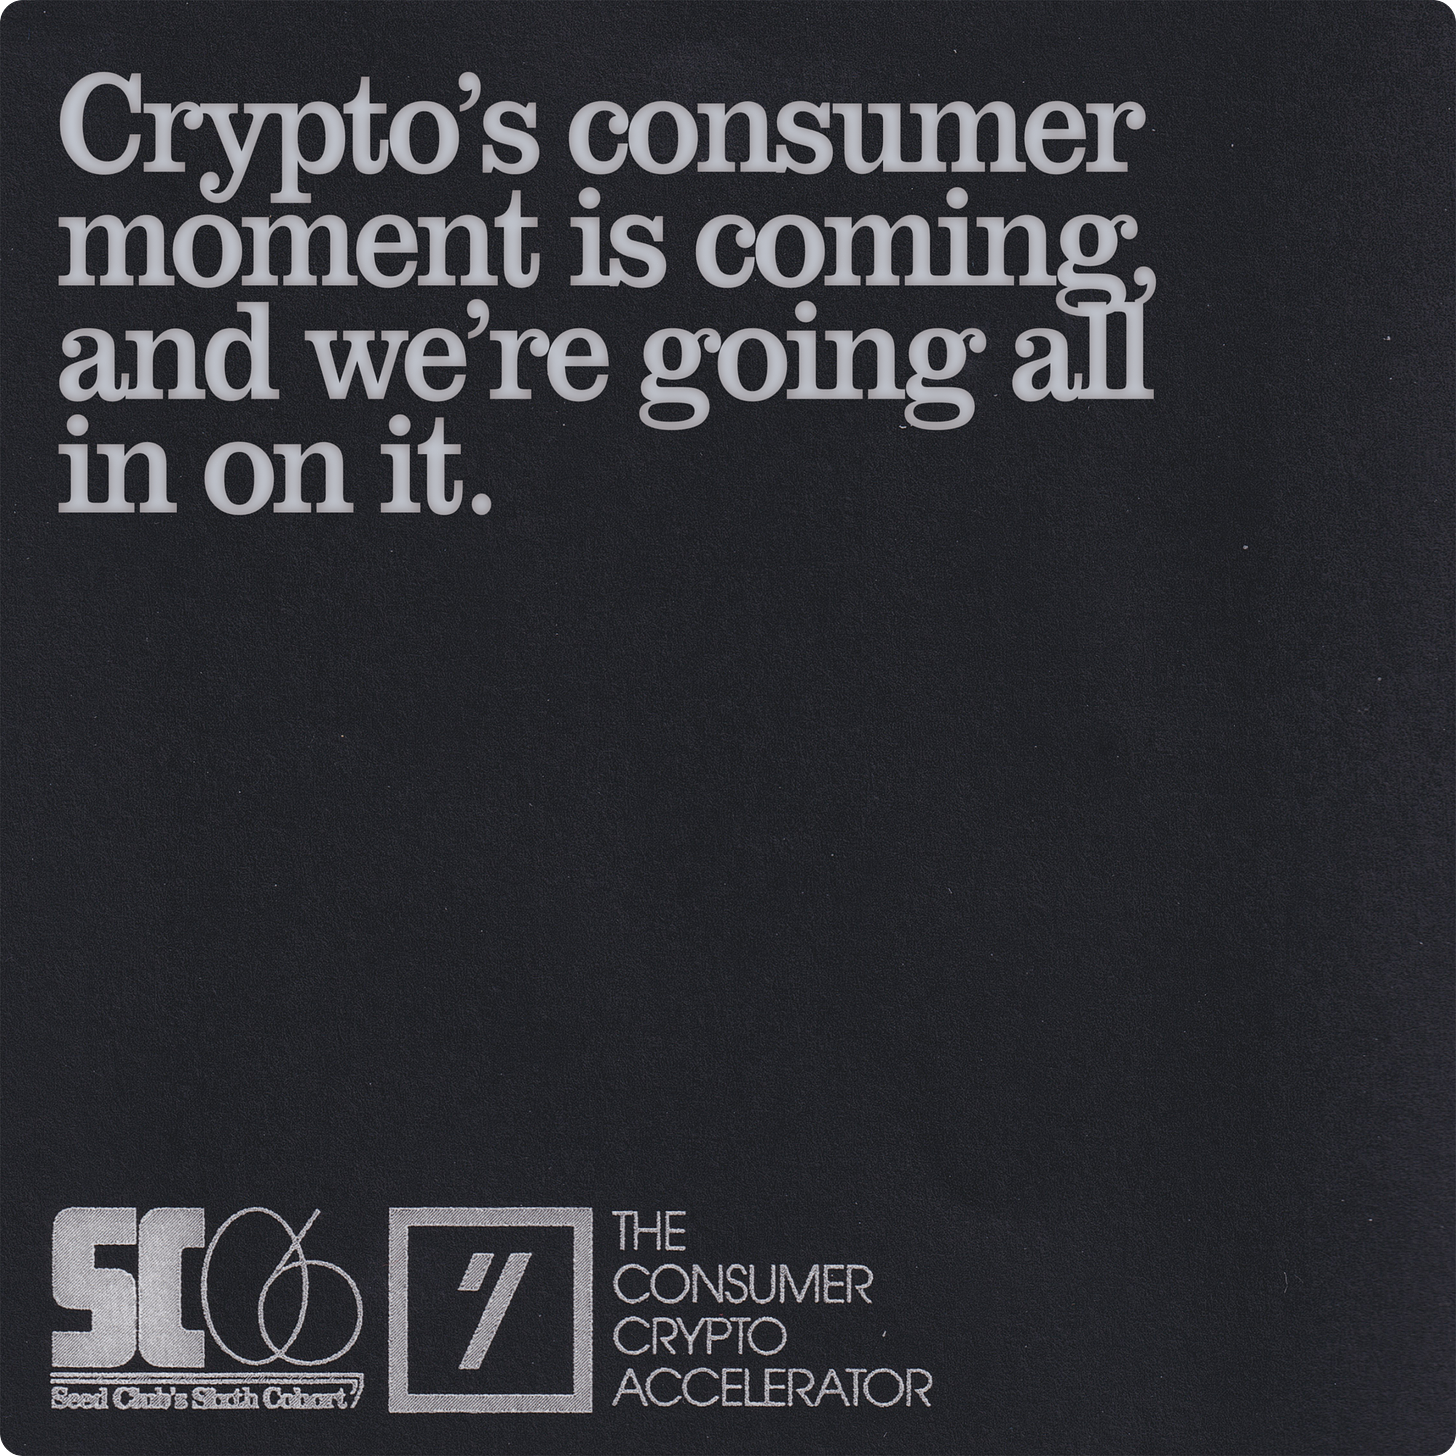 Crypto's consumer moment is coming and we're going all in on it.